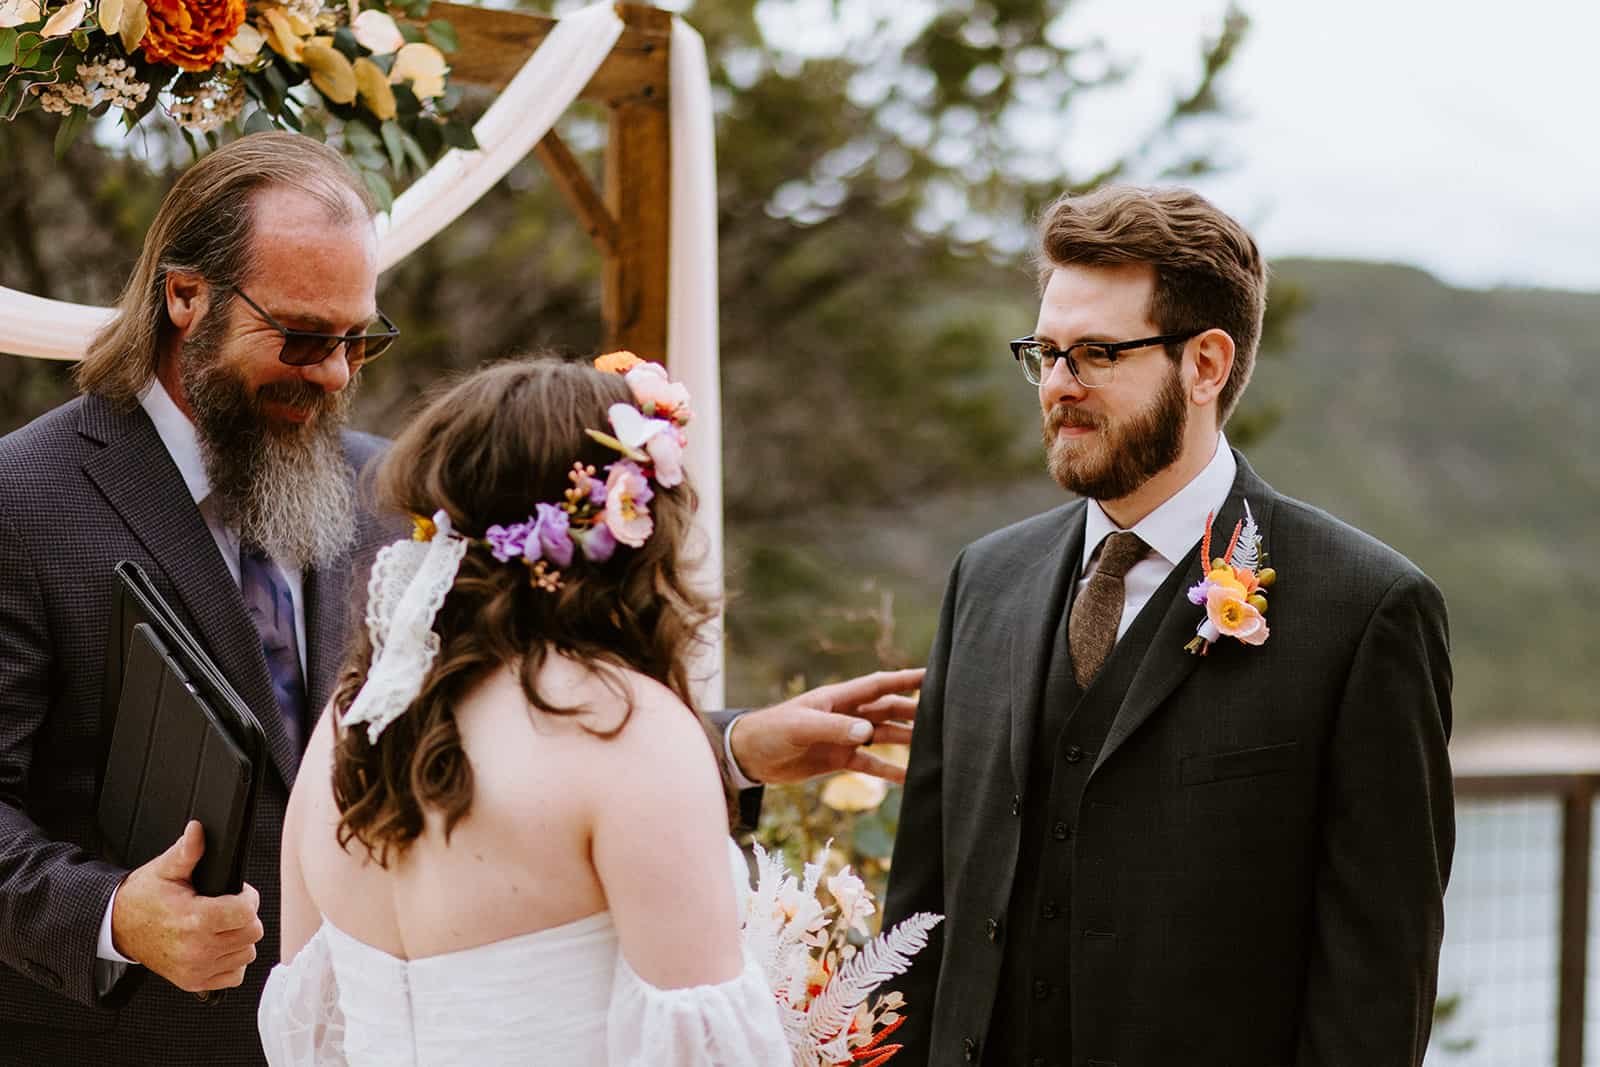 A man and woman saying vows at their elopement